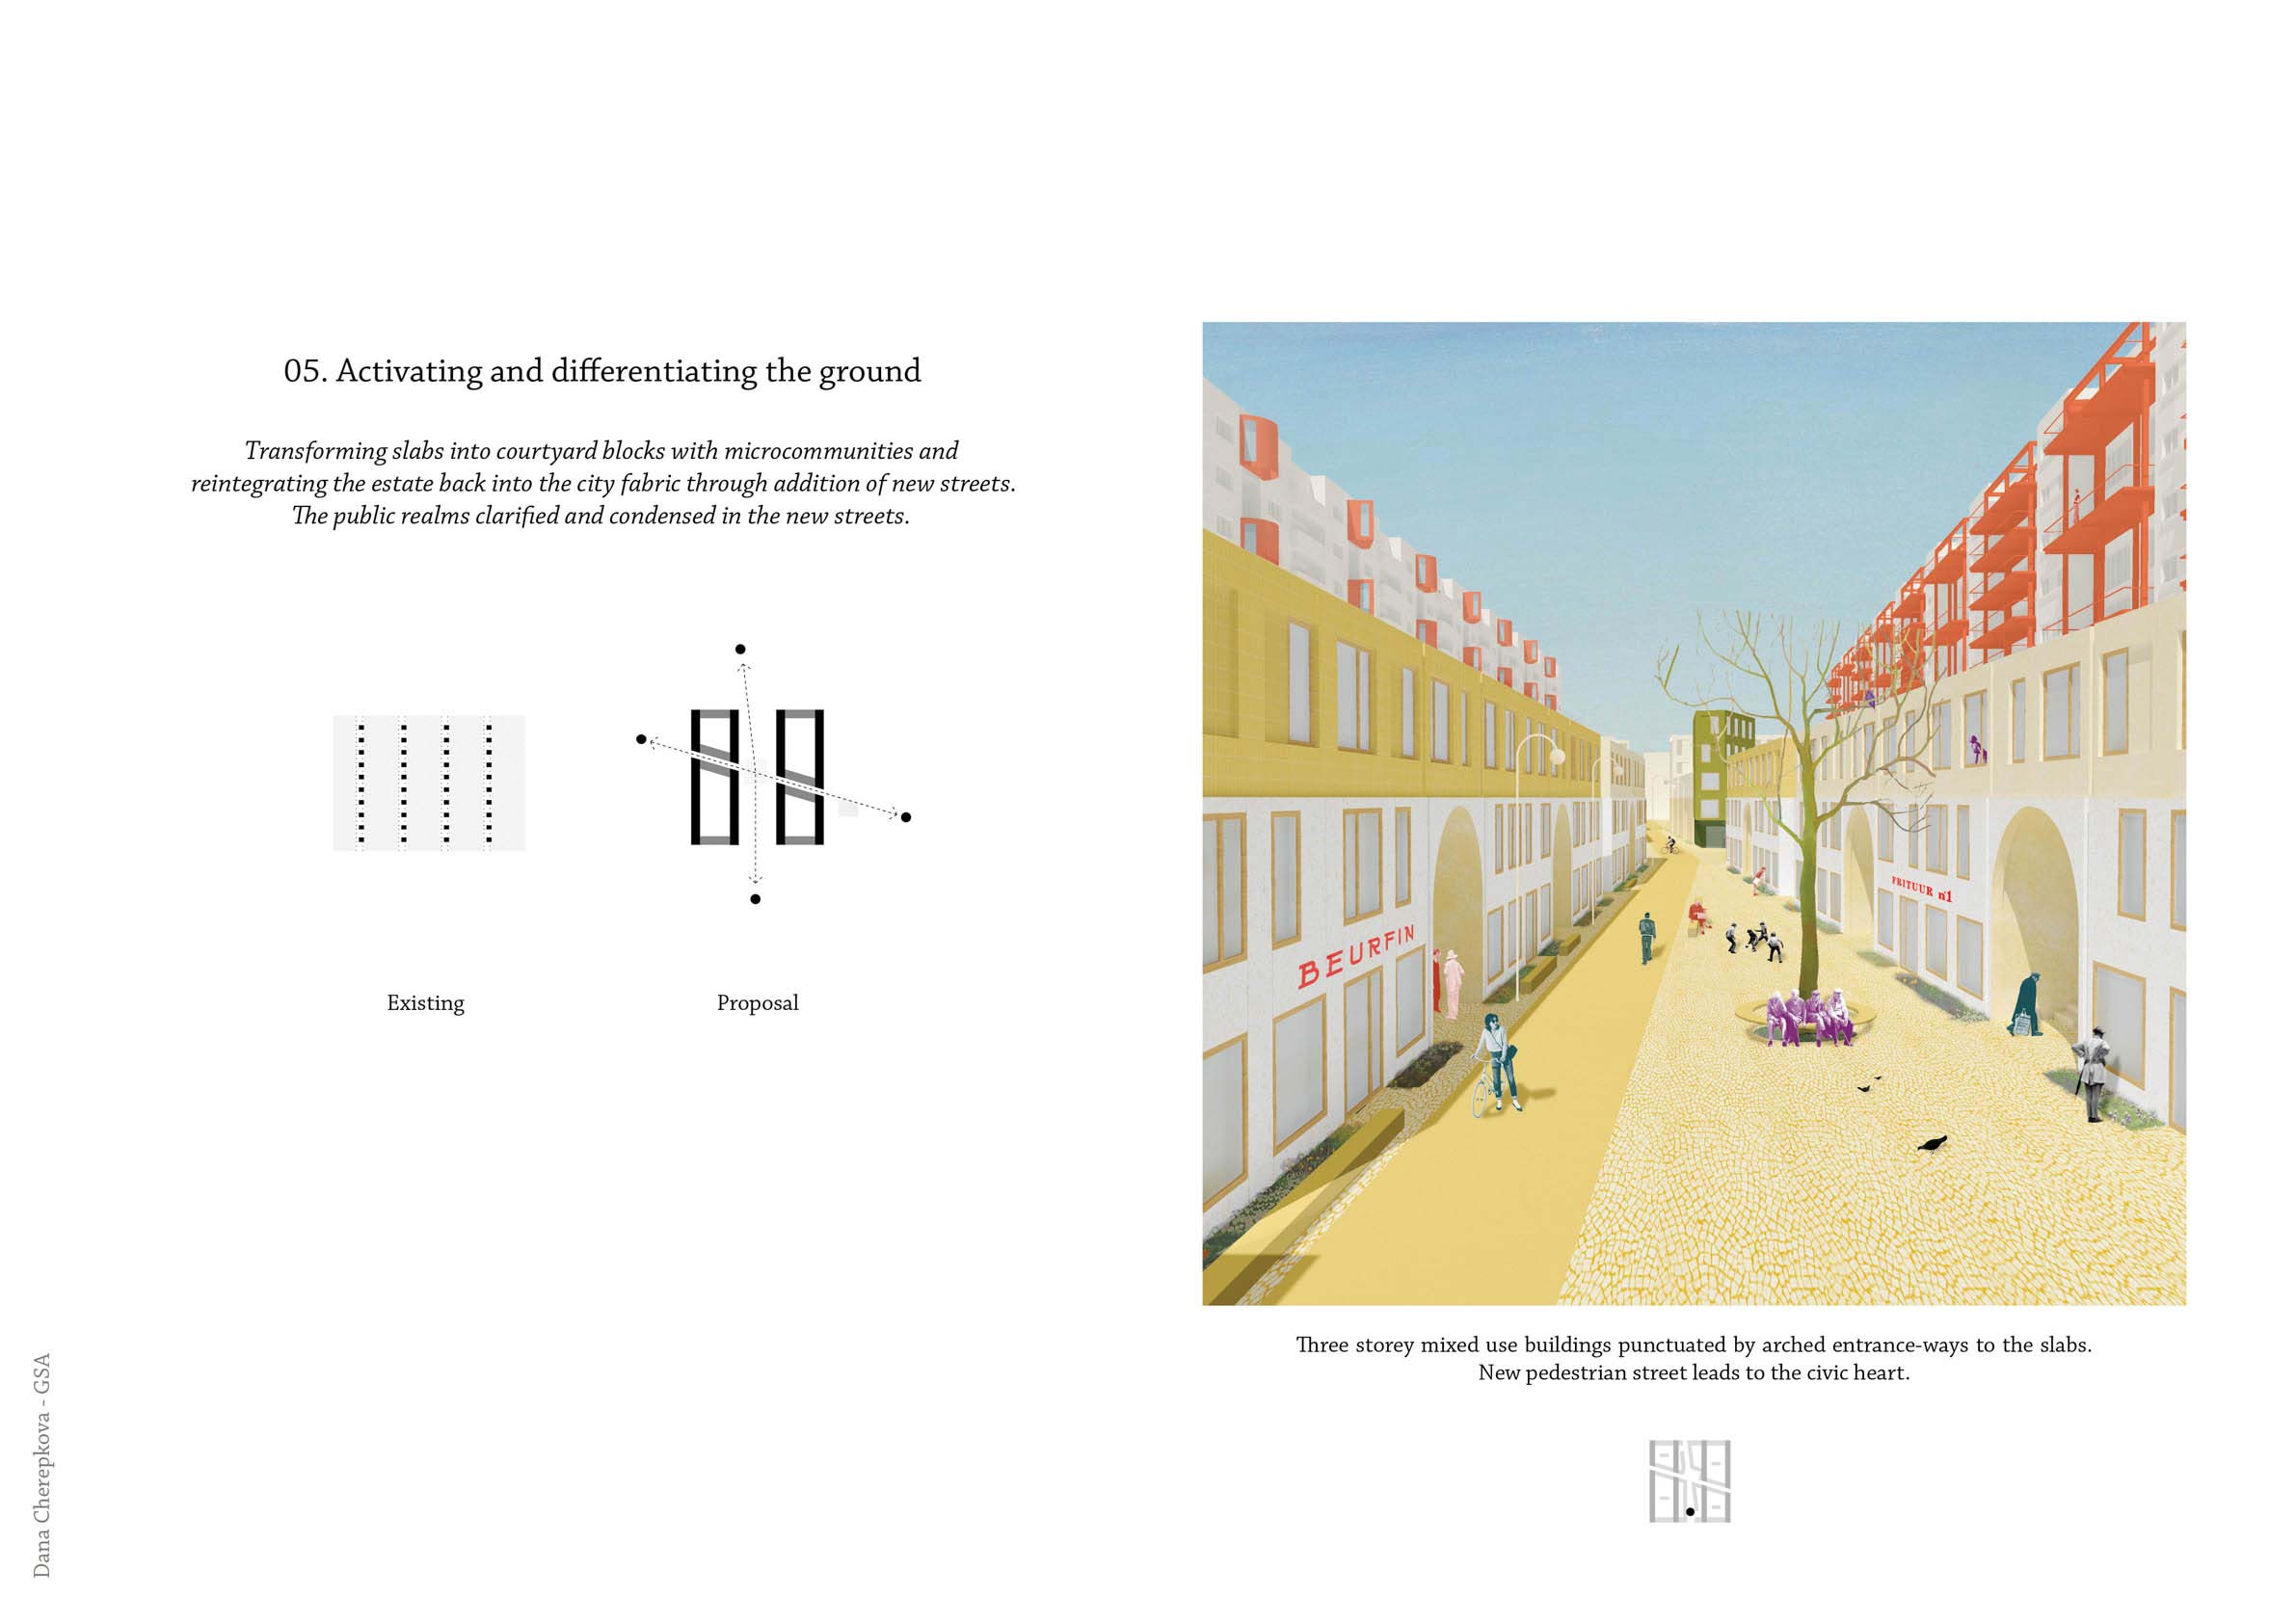 An architectural illustration of a street scene in a retrofitted modernist housing estate in Antwerp